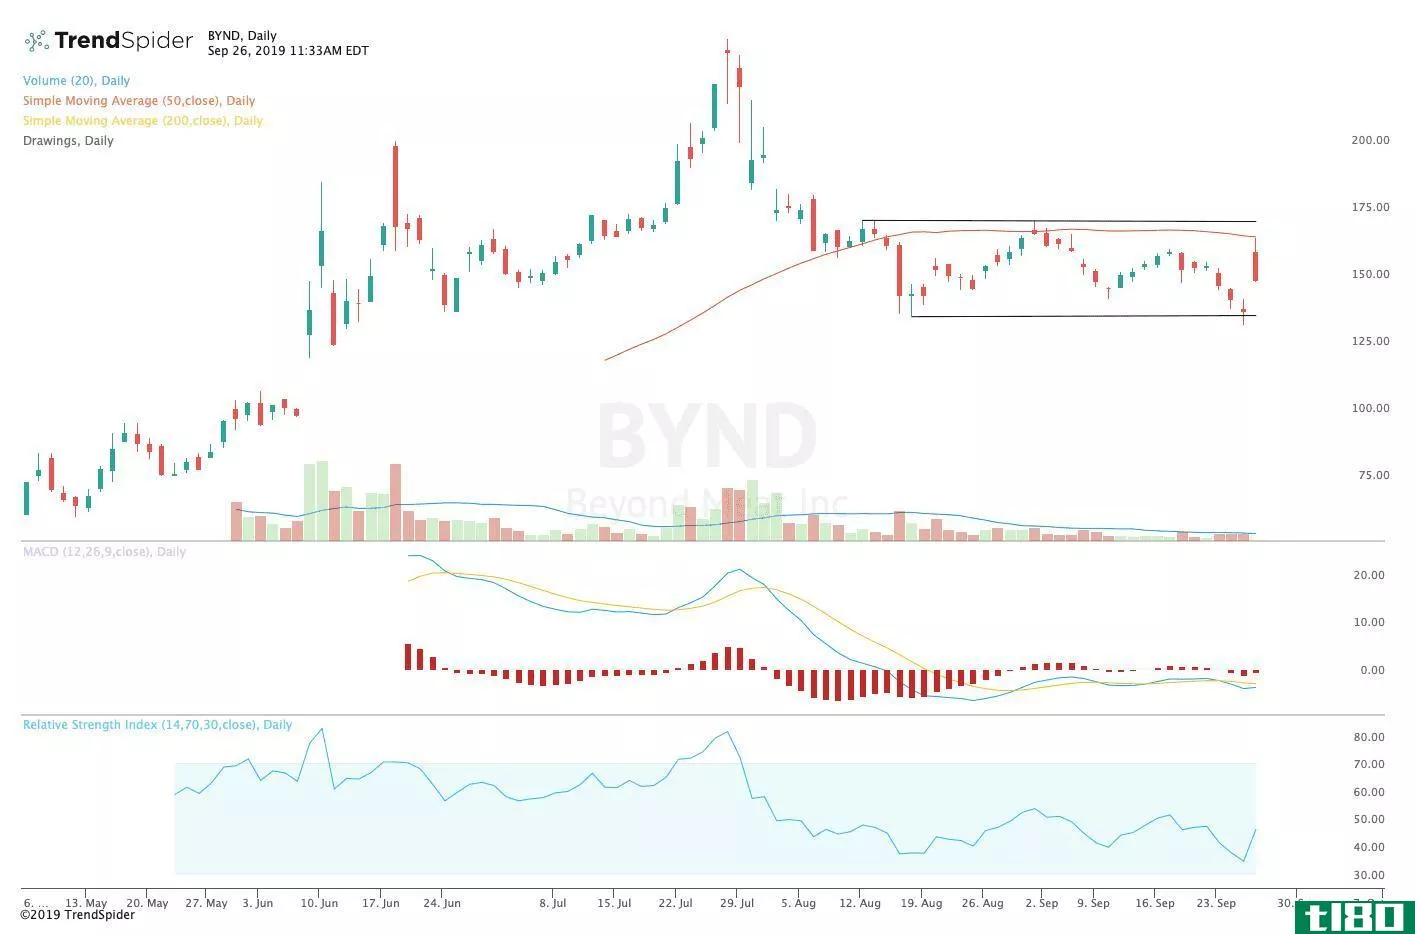 Chart showing the share price performance of Beyond Meat, Inc. (BYND)